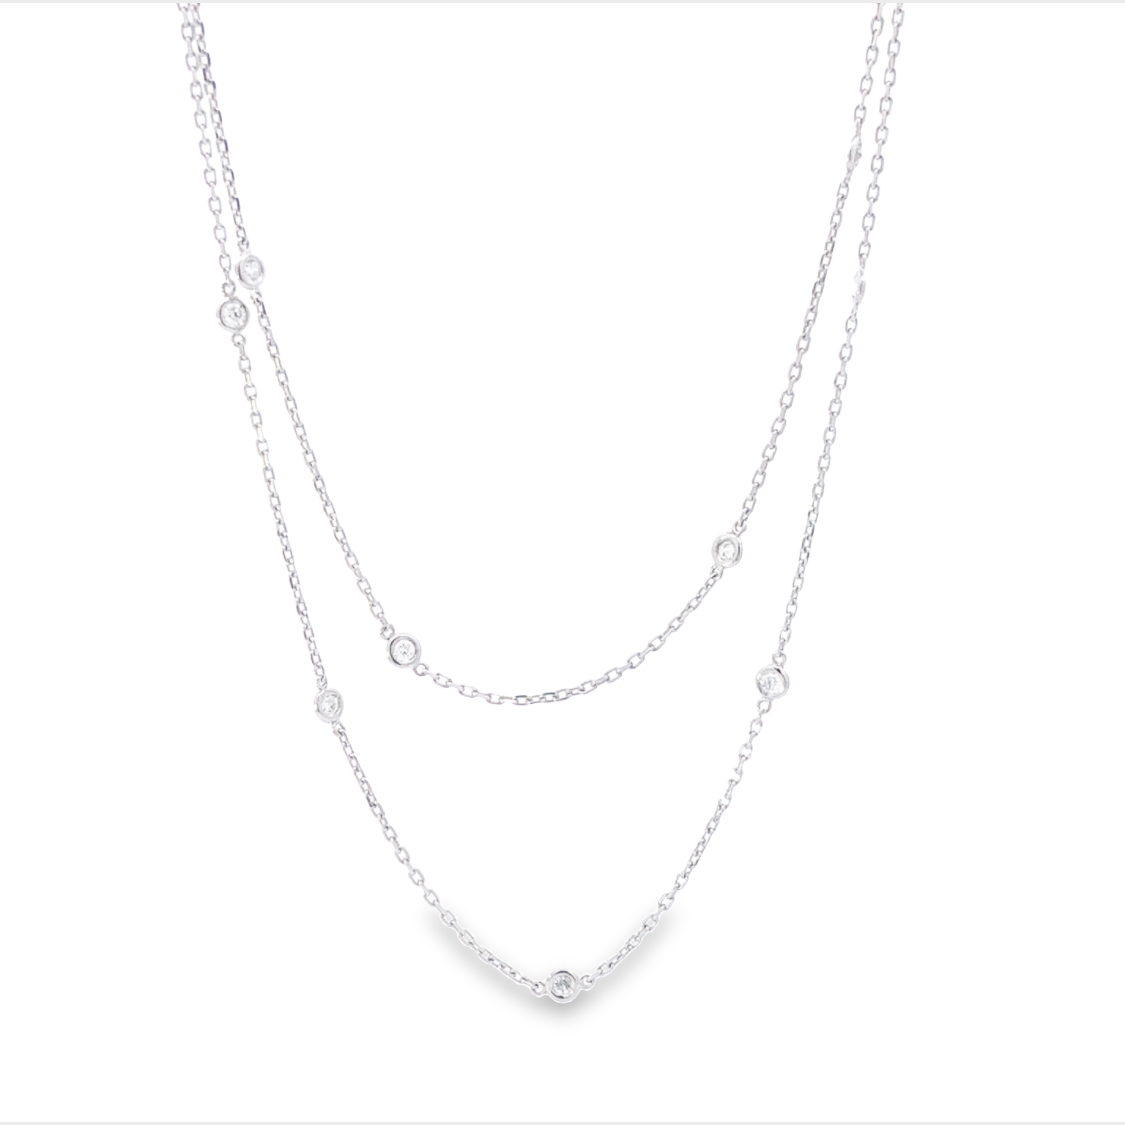 14K White Gold Diamonds by the Yard Necklace 24